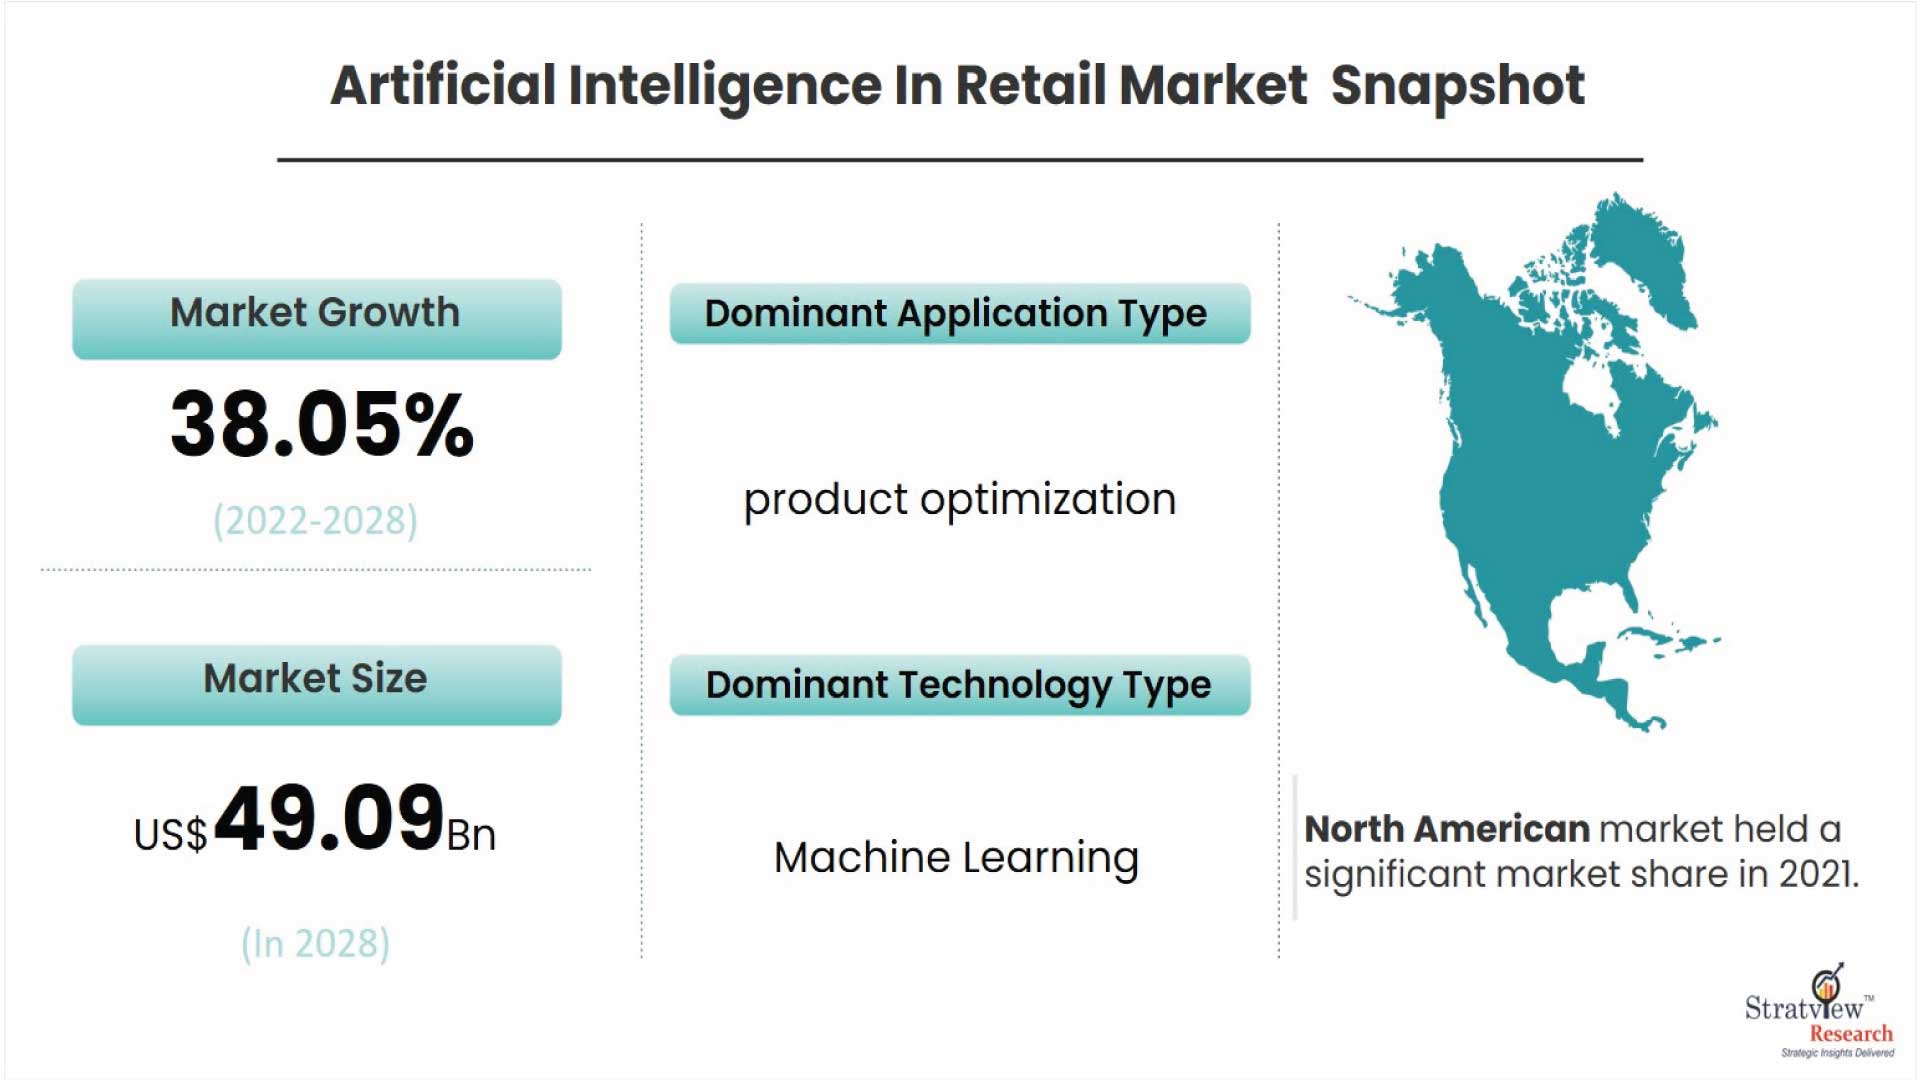 Artificial Intelligence (AI) In Retail Market is Projected to Reach US$ 49.09 Billion in 2028